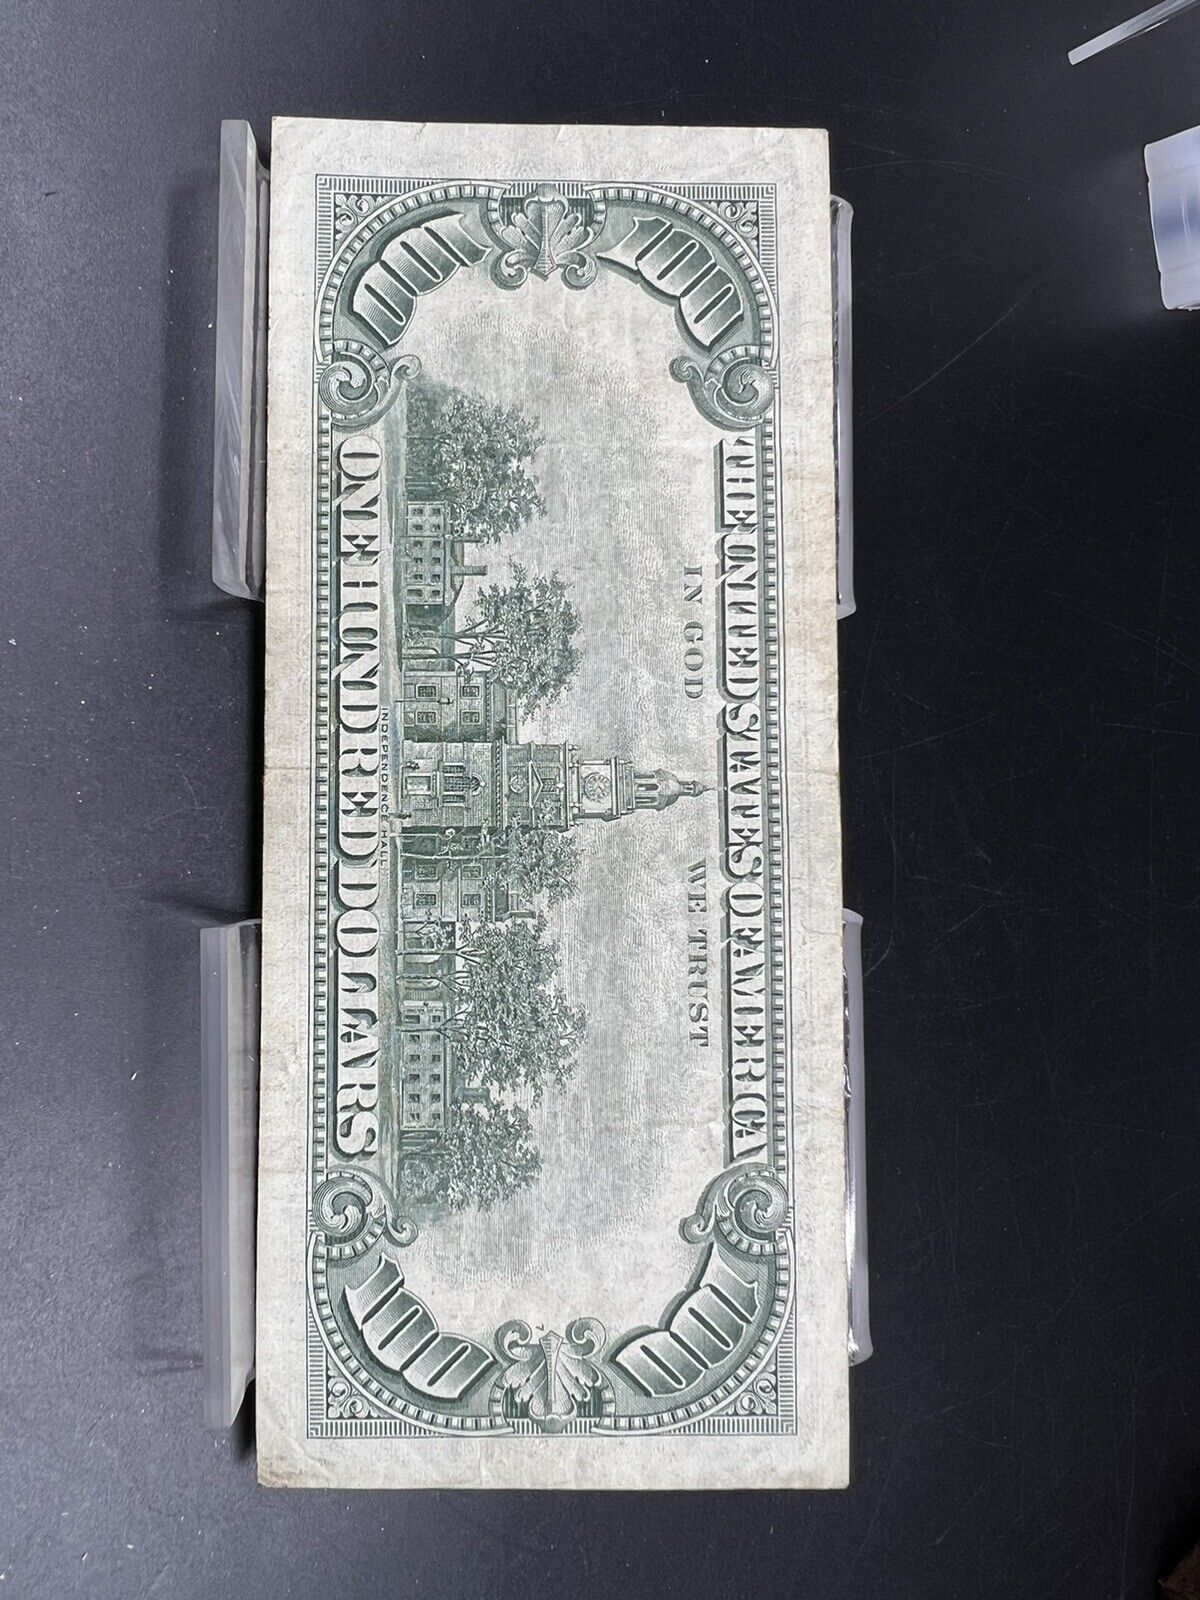 SC 1966 $100 Legal Tender Red Seal VG Circulated Note Bill